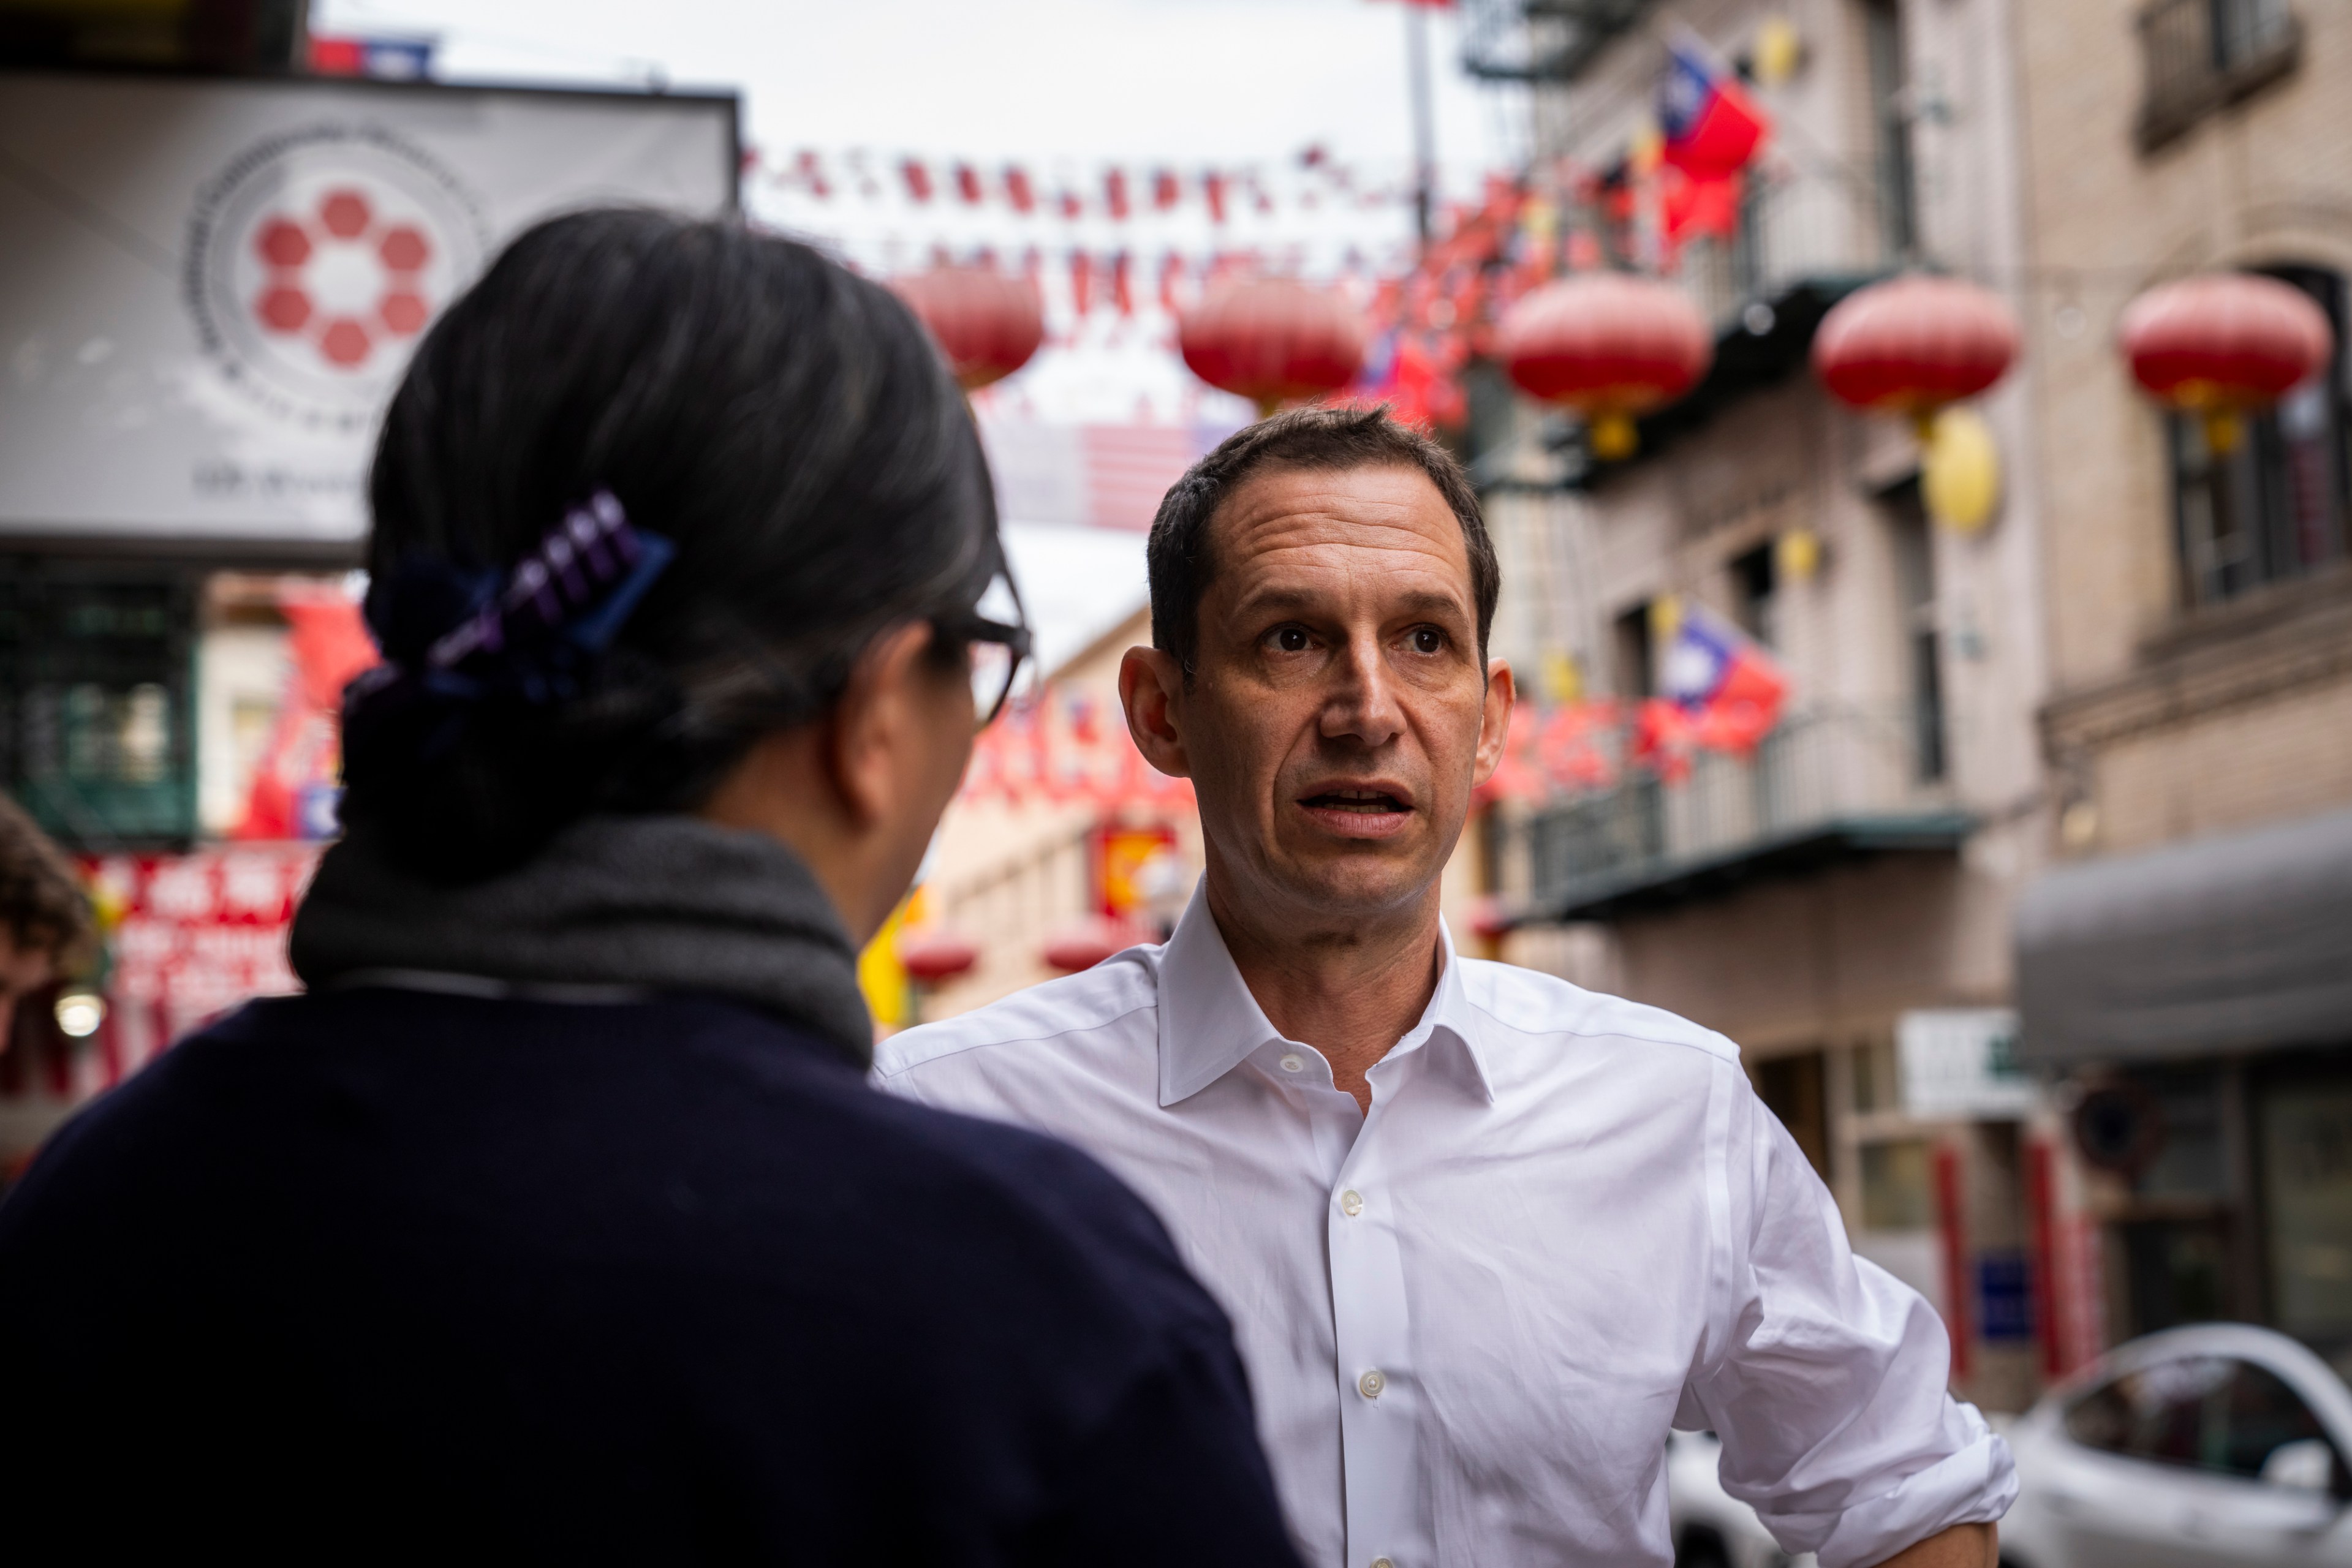 A man converses with someone in a street lined with red lanterns and festive flags.